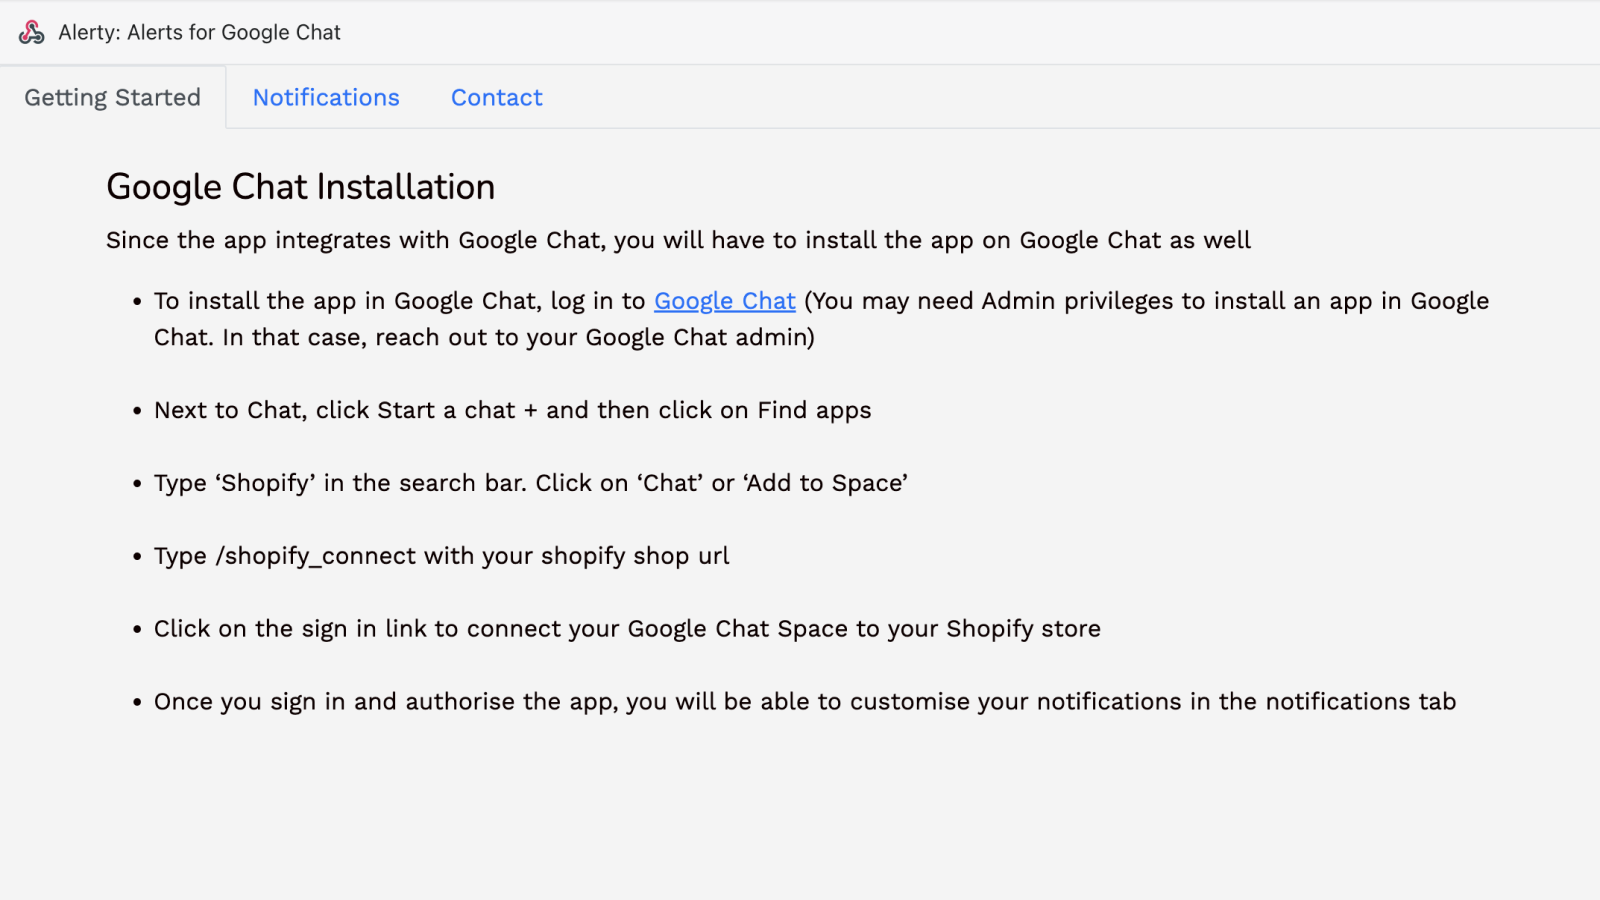 Integration with Google Chat.